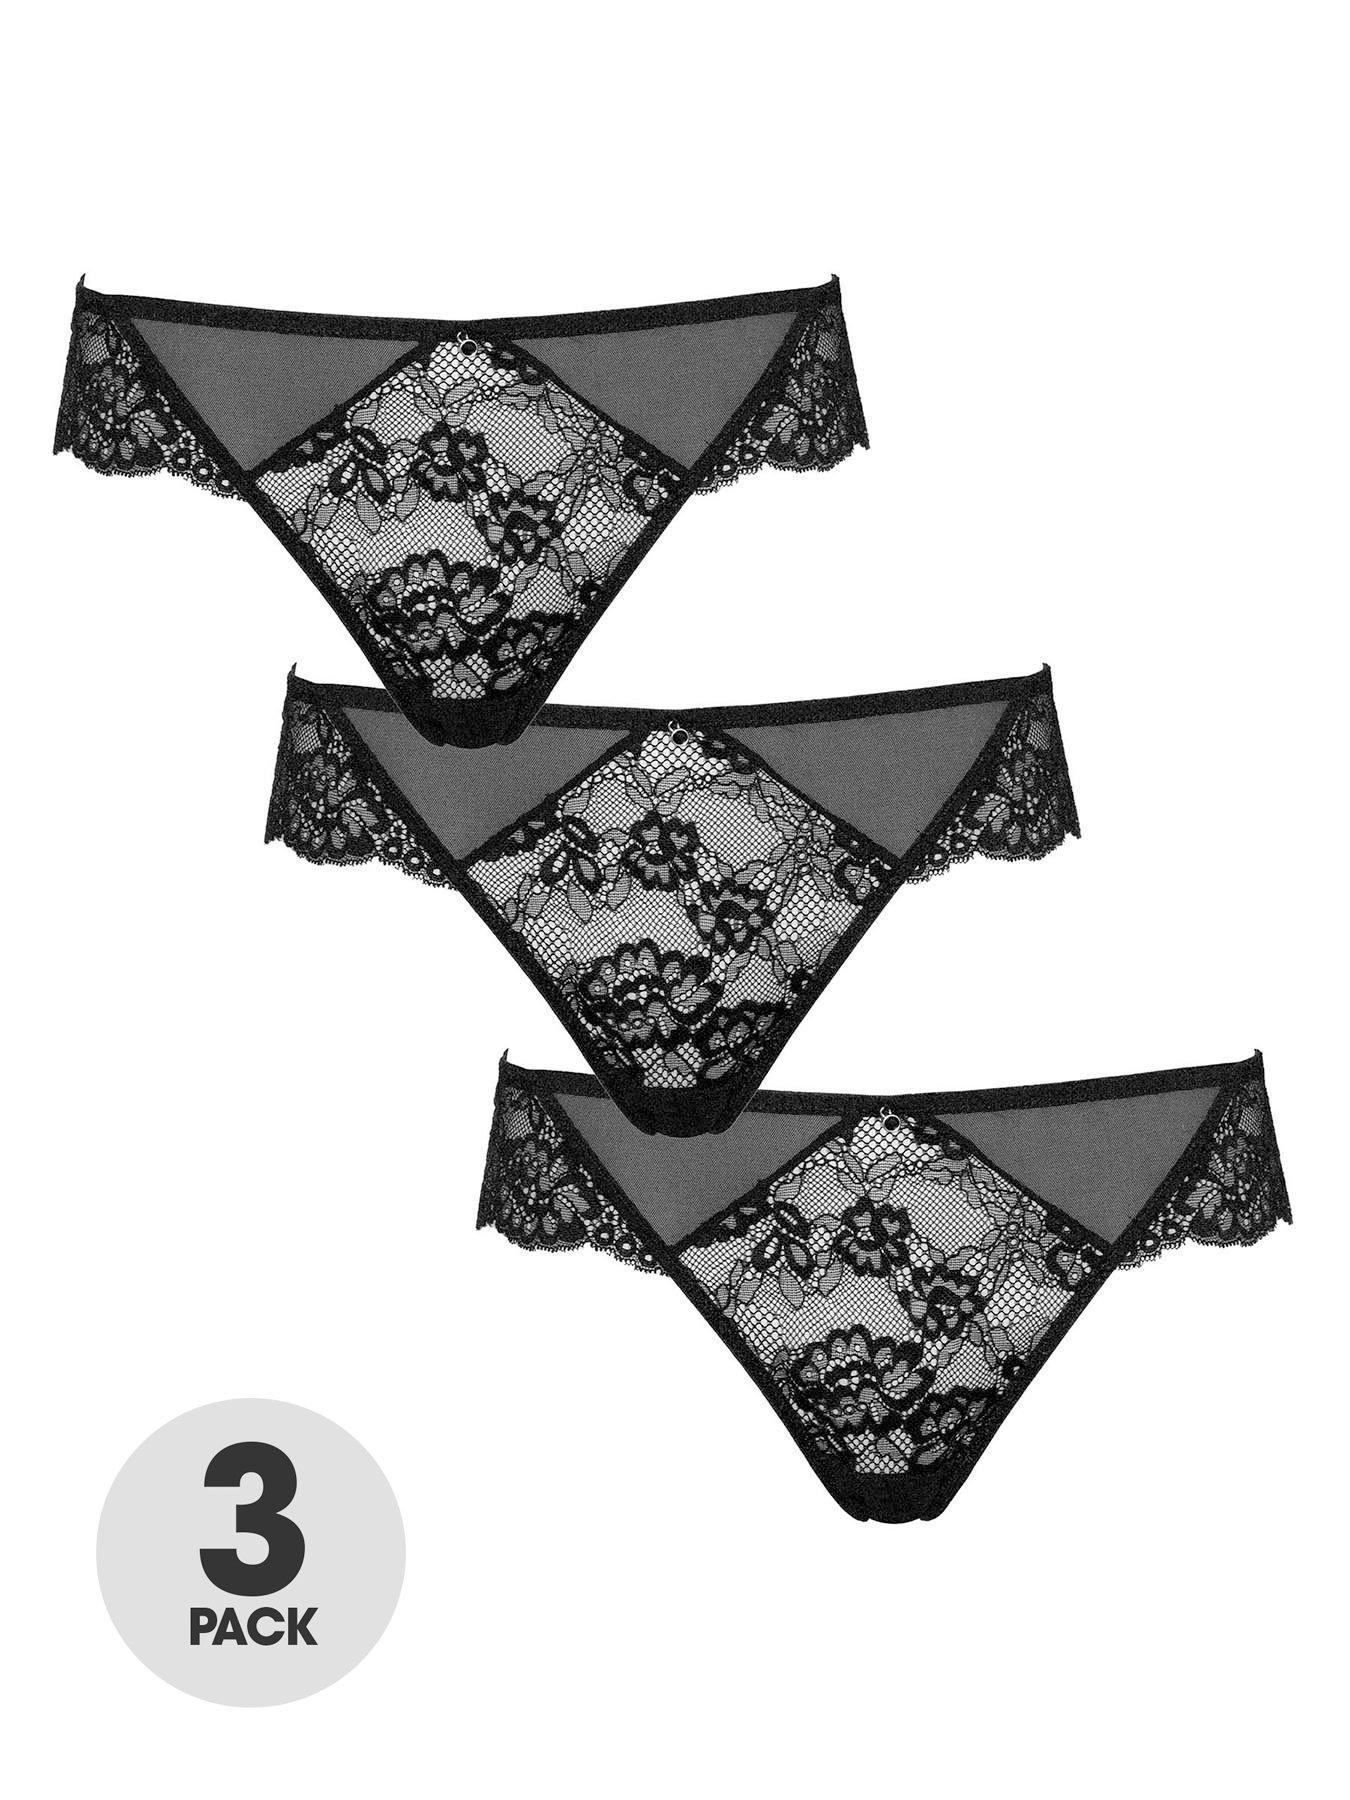 New Look 2 Pack Black and White Animal Lace Thongs